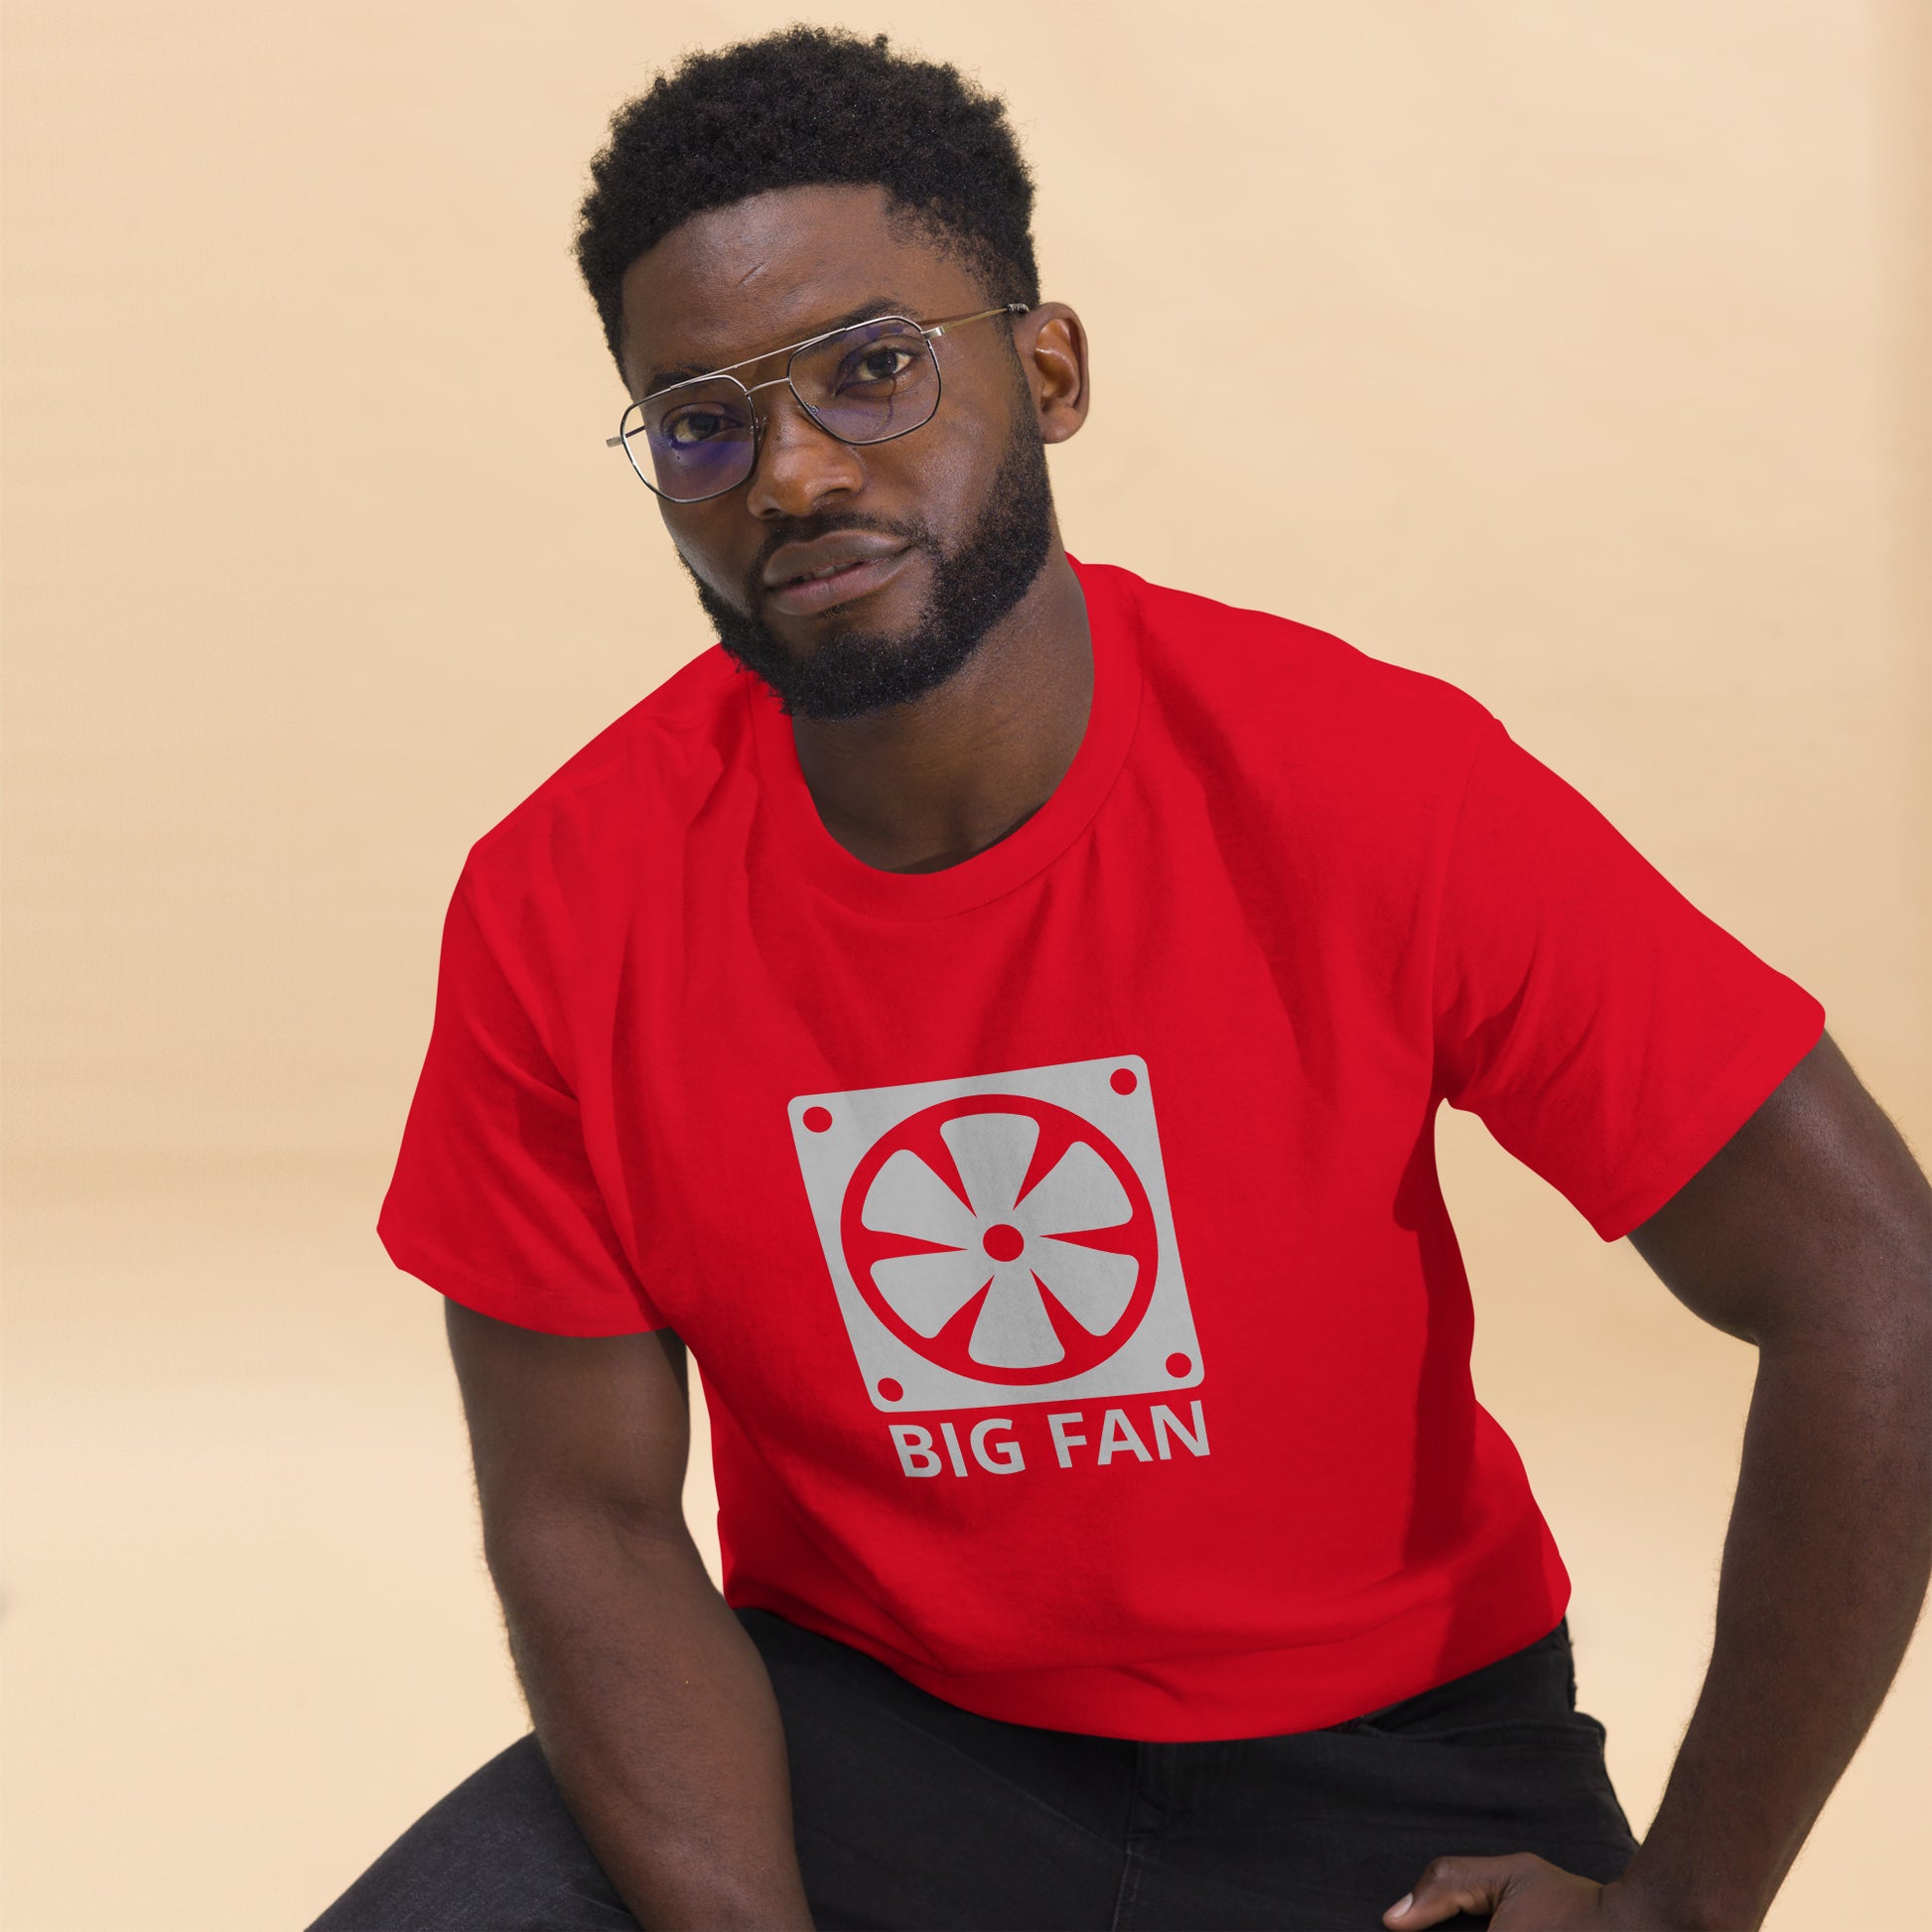 Man with red t-shirt with image of a big computer fan and the text "BIG FAN"